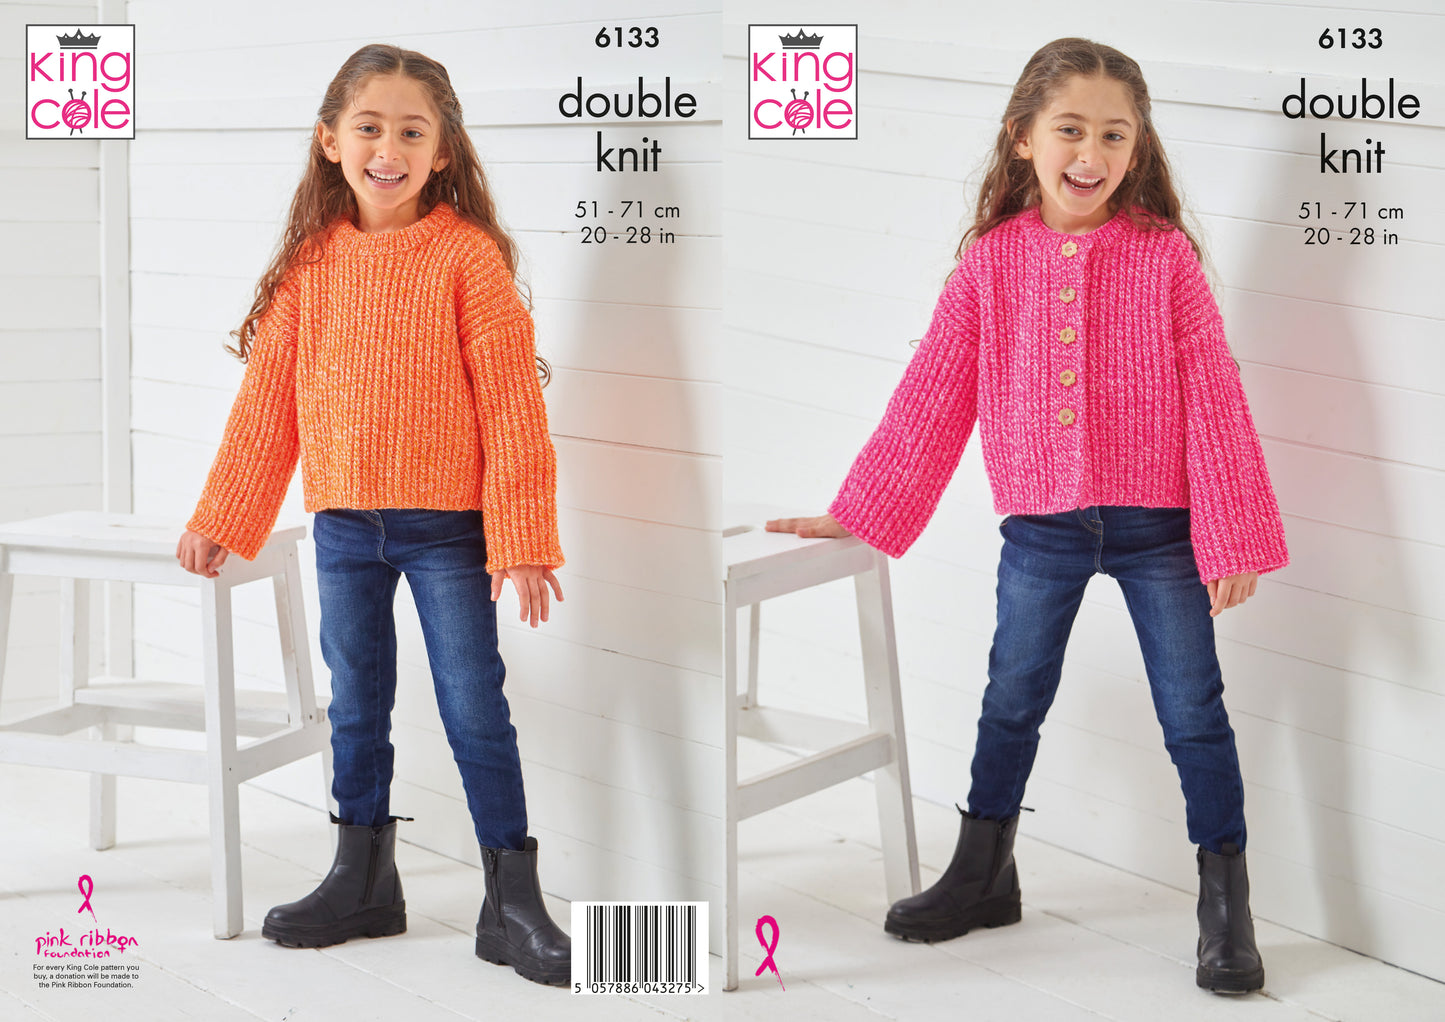 Knitting Pattern 6133 - Cardigan & Sweater Knitted in Pricewise Twirly DK